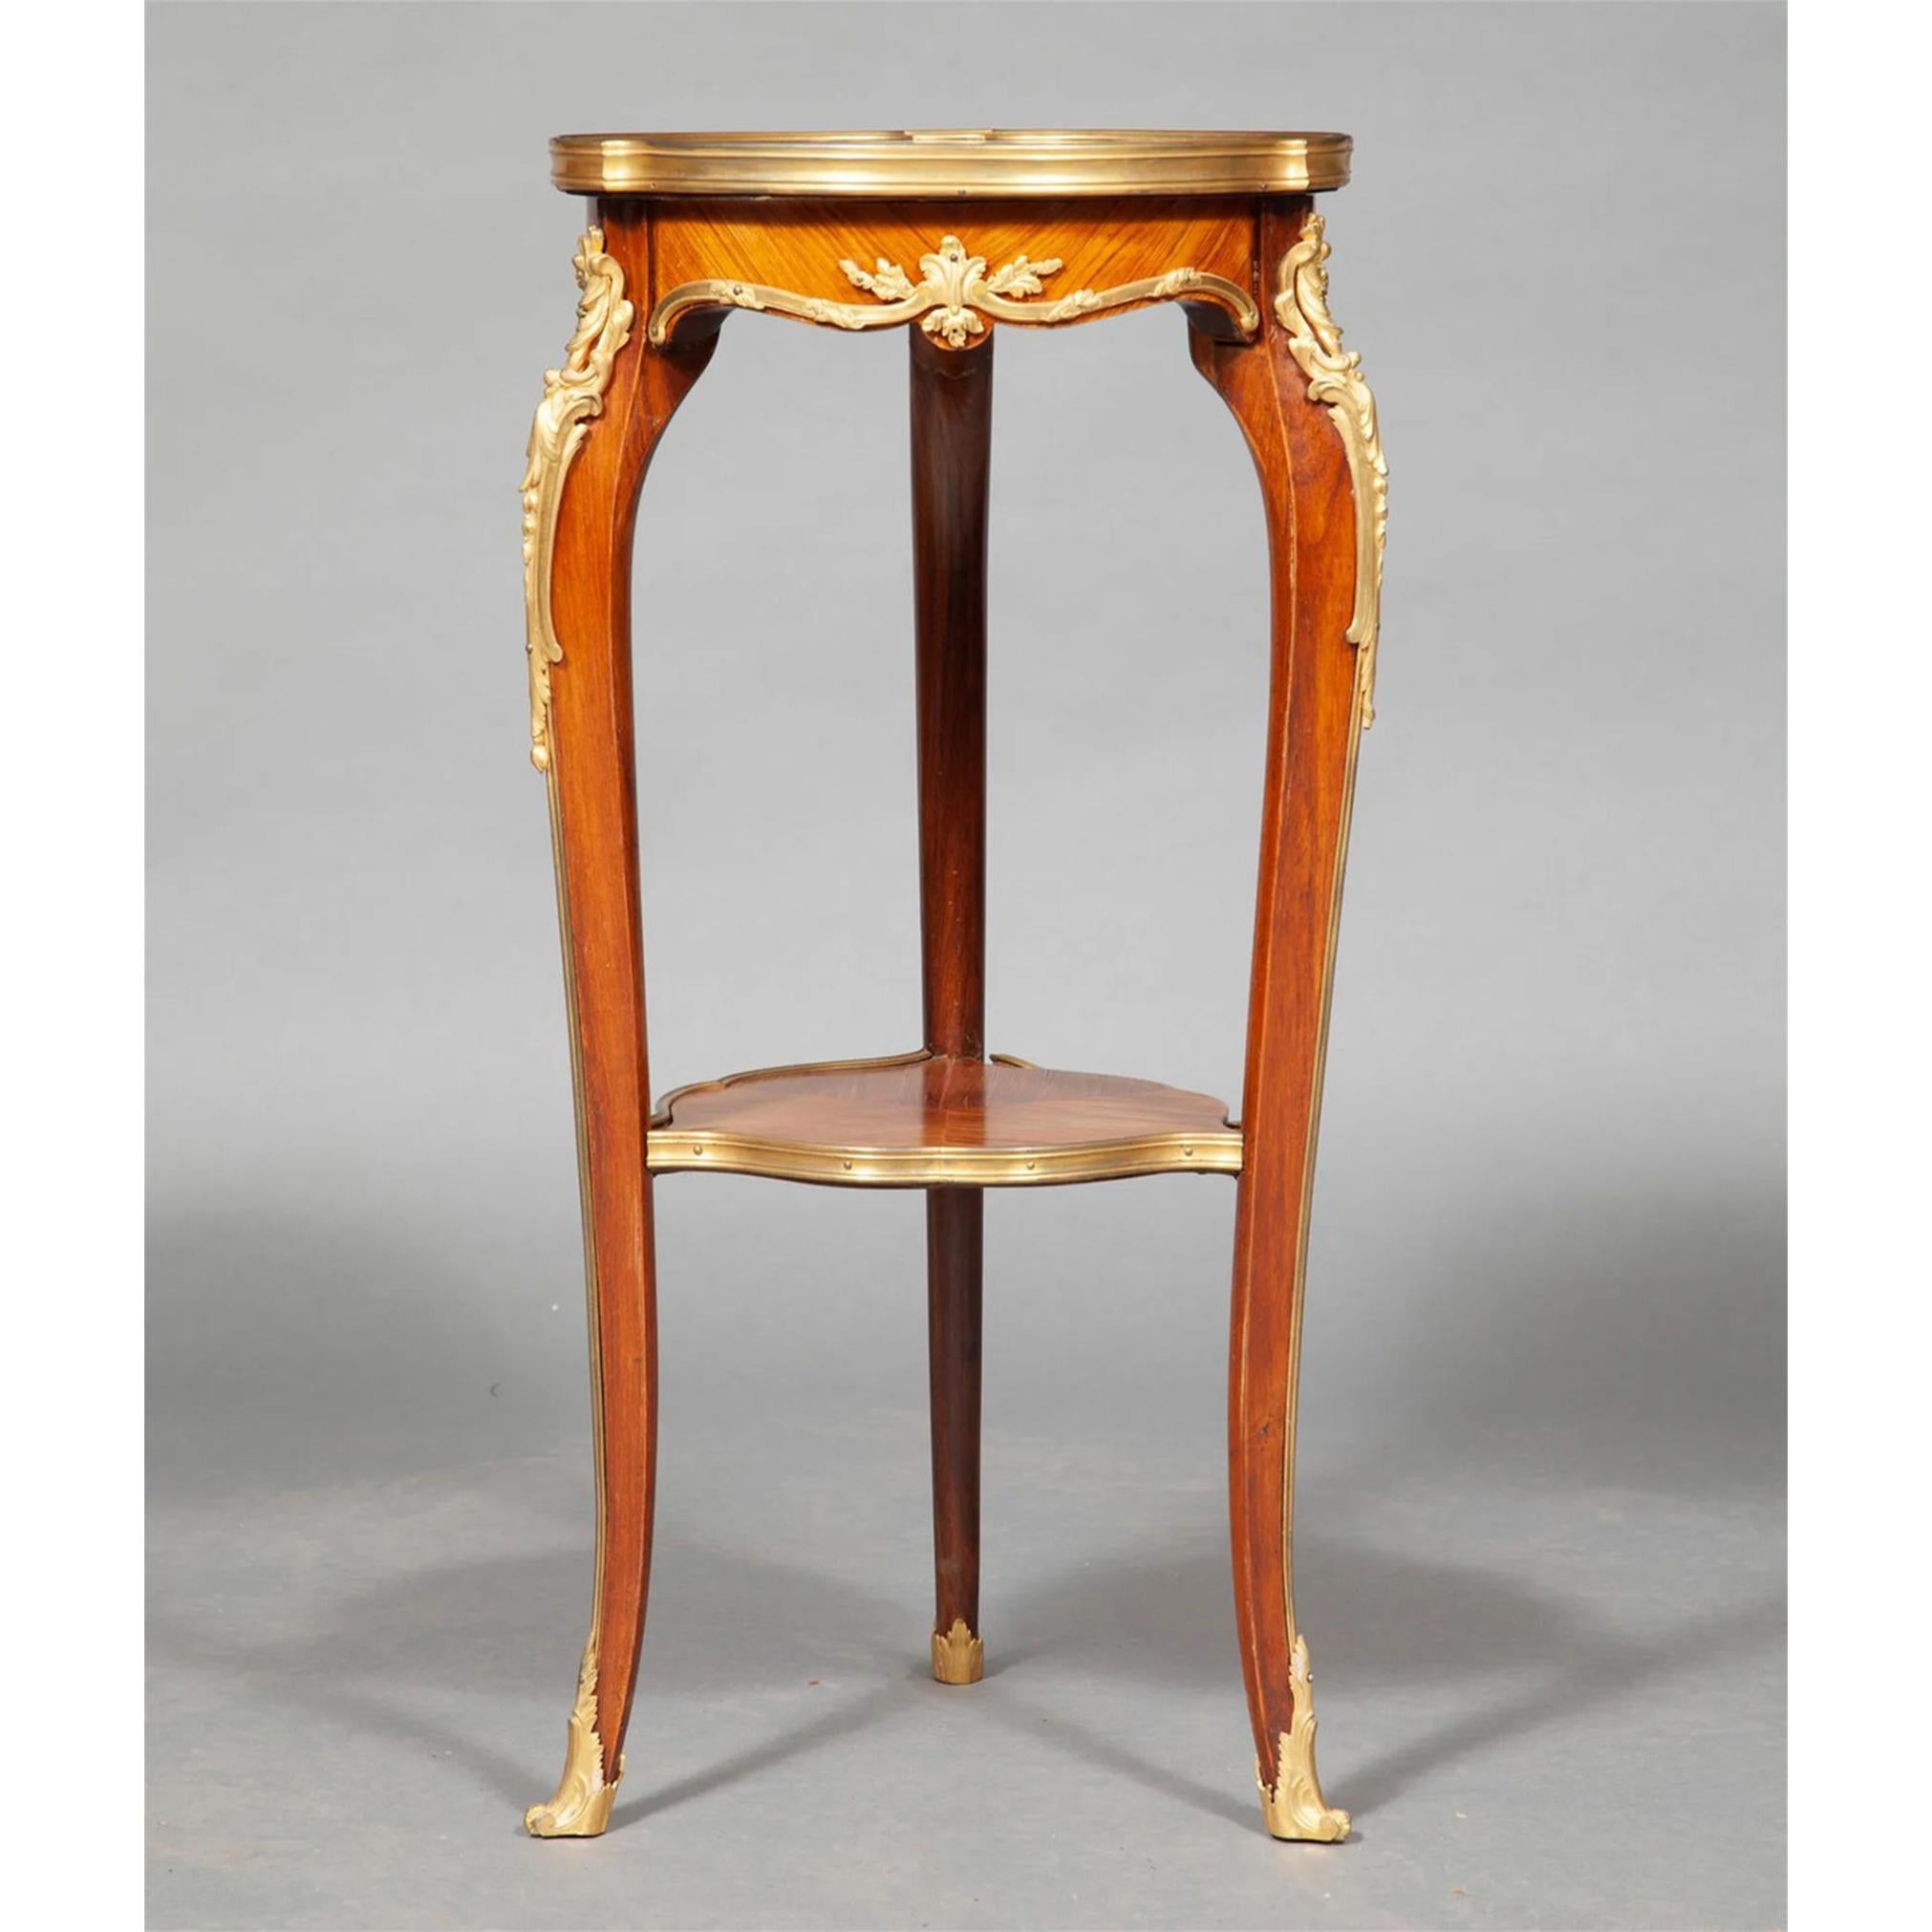 French Louis XV Style Gilt-Bronze Mounted Kingwood Table Attributed to Zwinner For Sale